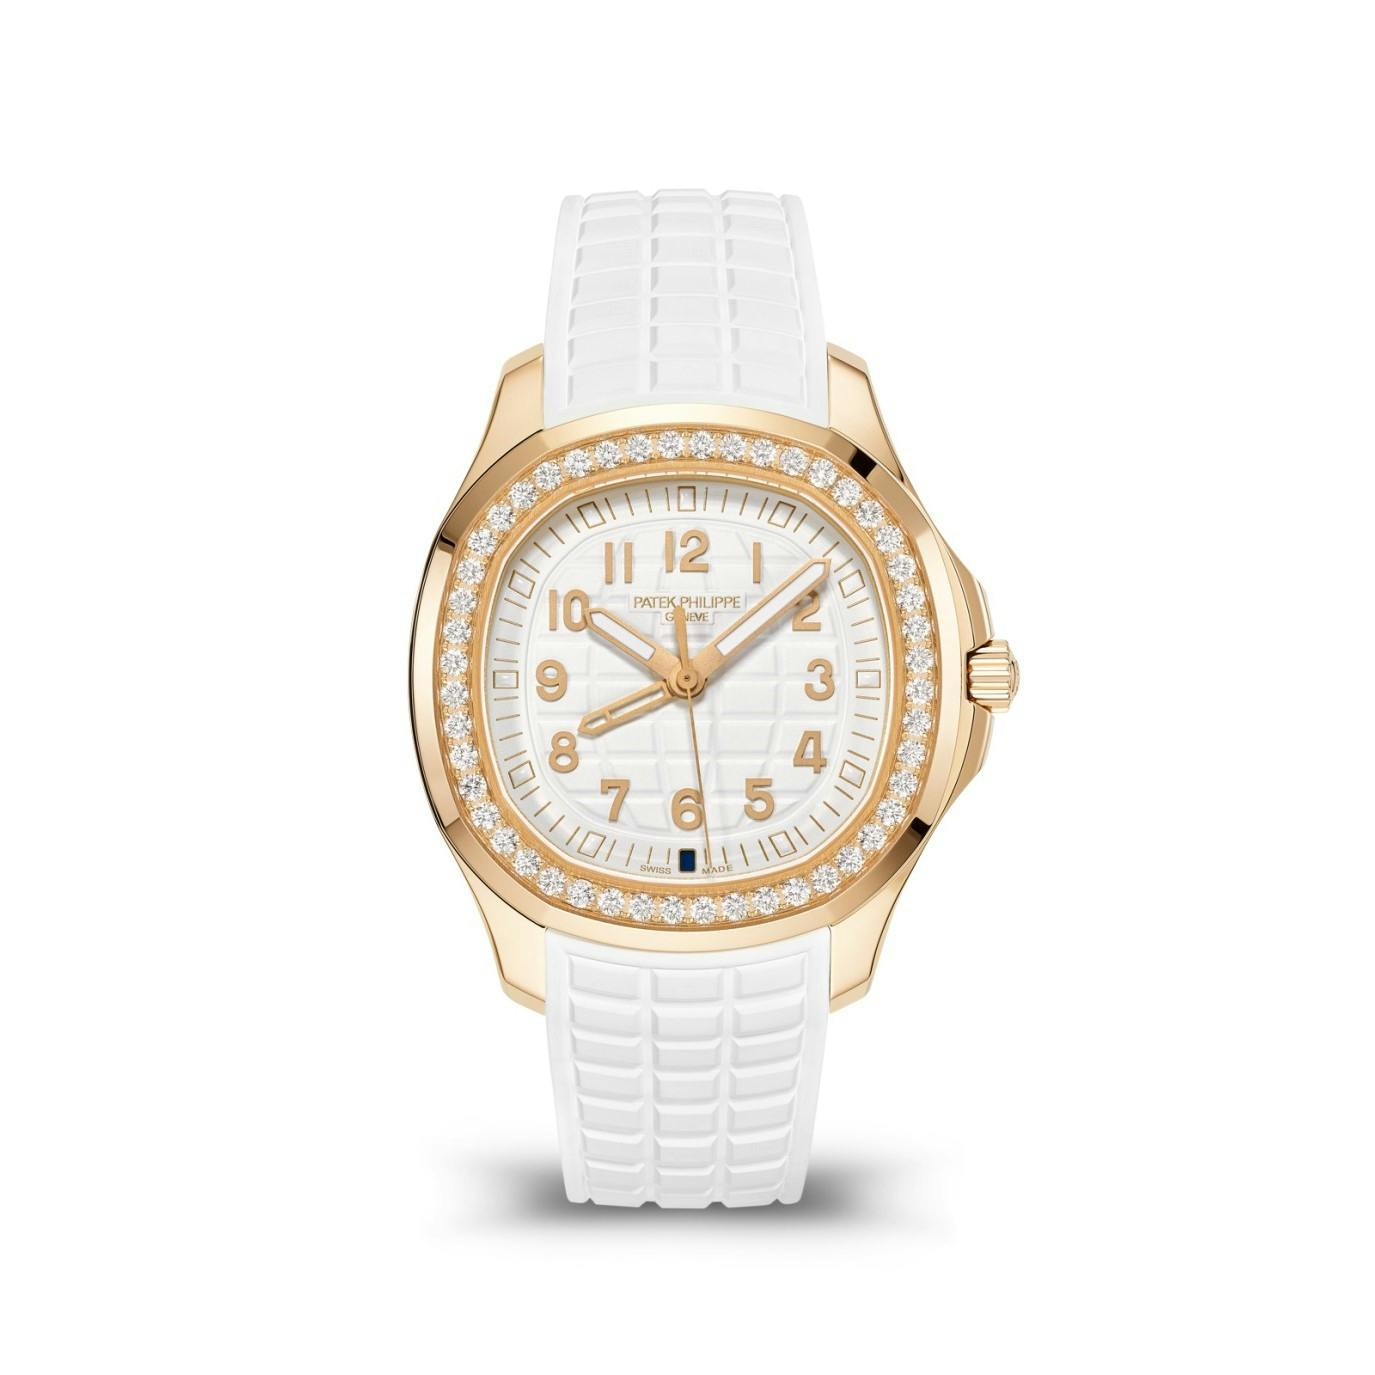 Patek Philippe Aquanaut in Rose Gold and White with Diamonds (5269/200R)